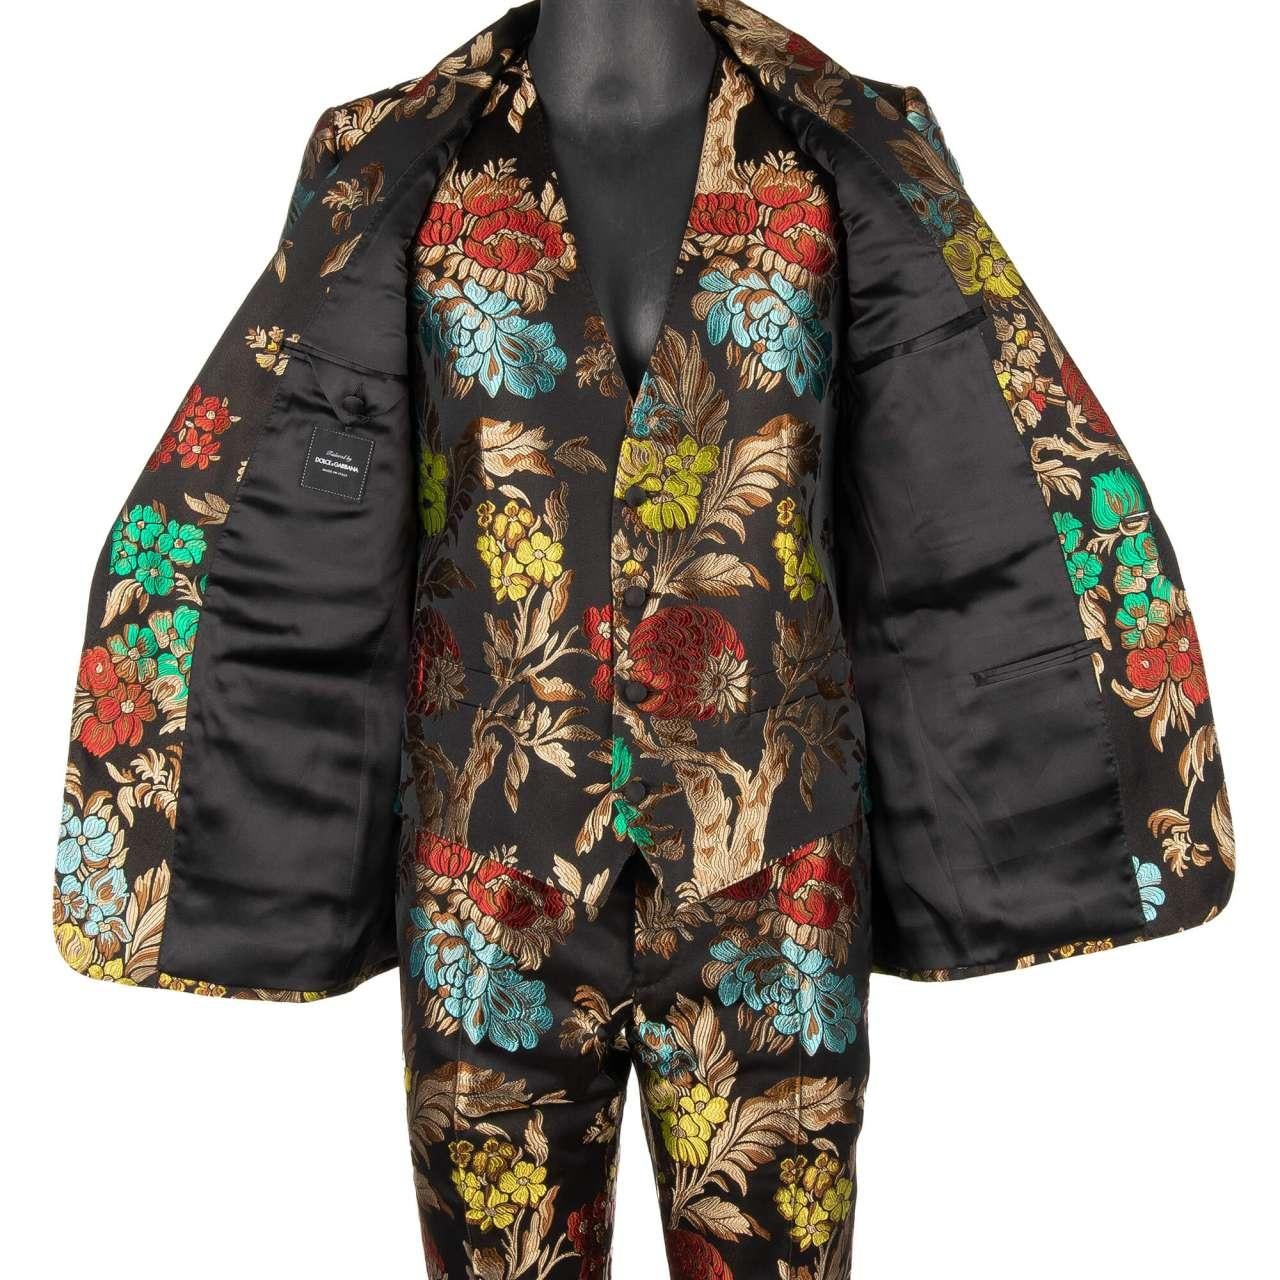 - Flower Jacquard 3 piece suit with shawl lapel in beige, blue, red, yellow, green and black by DOLCE & GABBANA - RUNWAY - Dolce & Gabbana Fashion Show - New with tag - MADE in ITALY - Slim Fit - Model: GK6YMT-HJMFB-S8350 - Material: 73% Acetate,